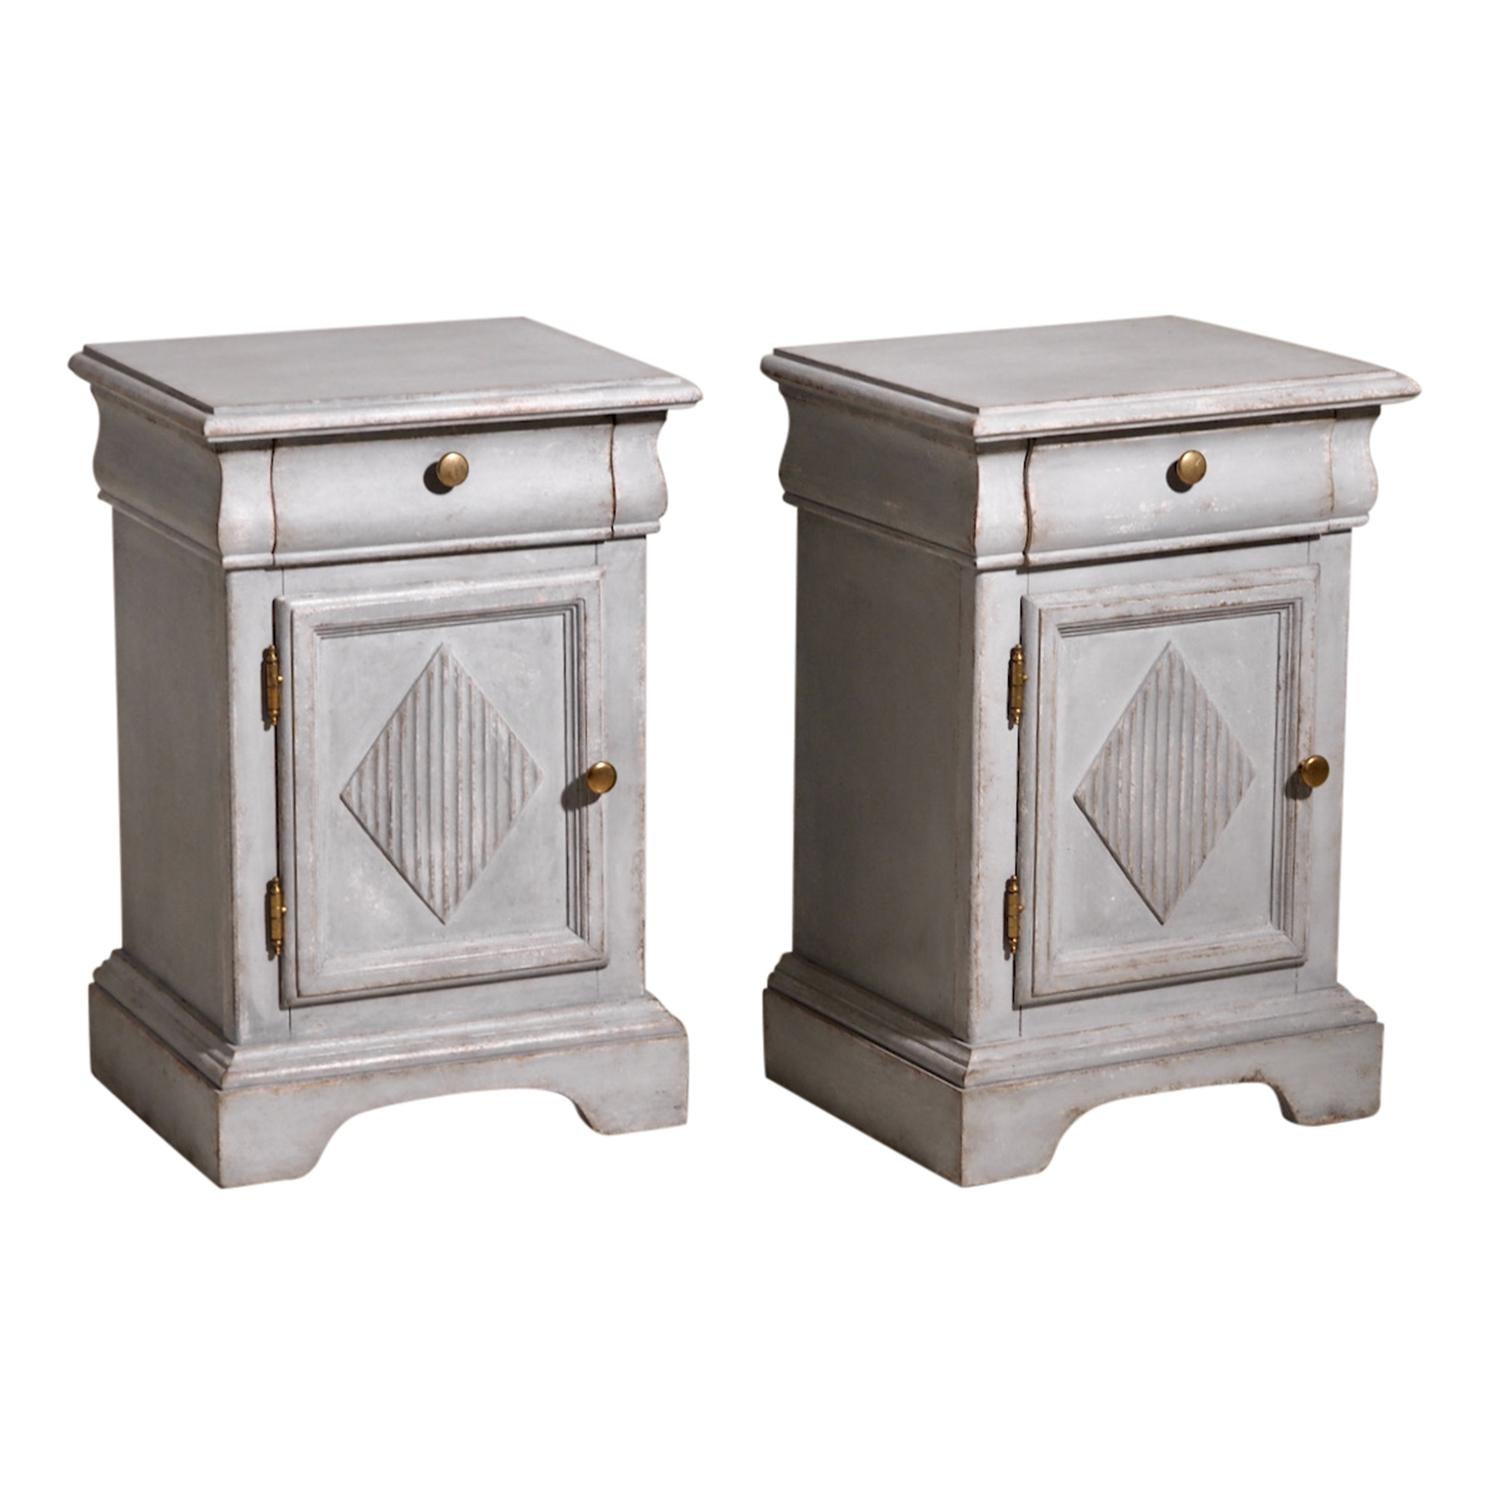 A light-grey, antique Swedish Gustavian pair of pedestal cabinets, bedside tables made of hand crafted Pinewood, in good condition. The small Scandinavian nightstands are composed with one upper drawer and a door, enhanced by detailed wood carvings.